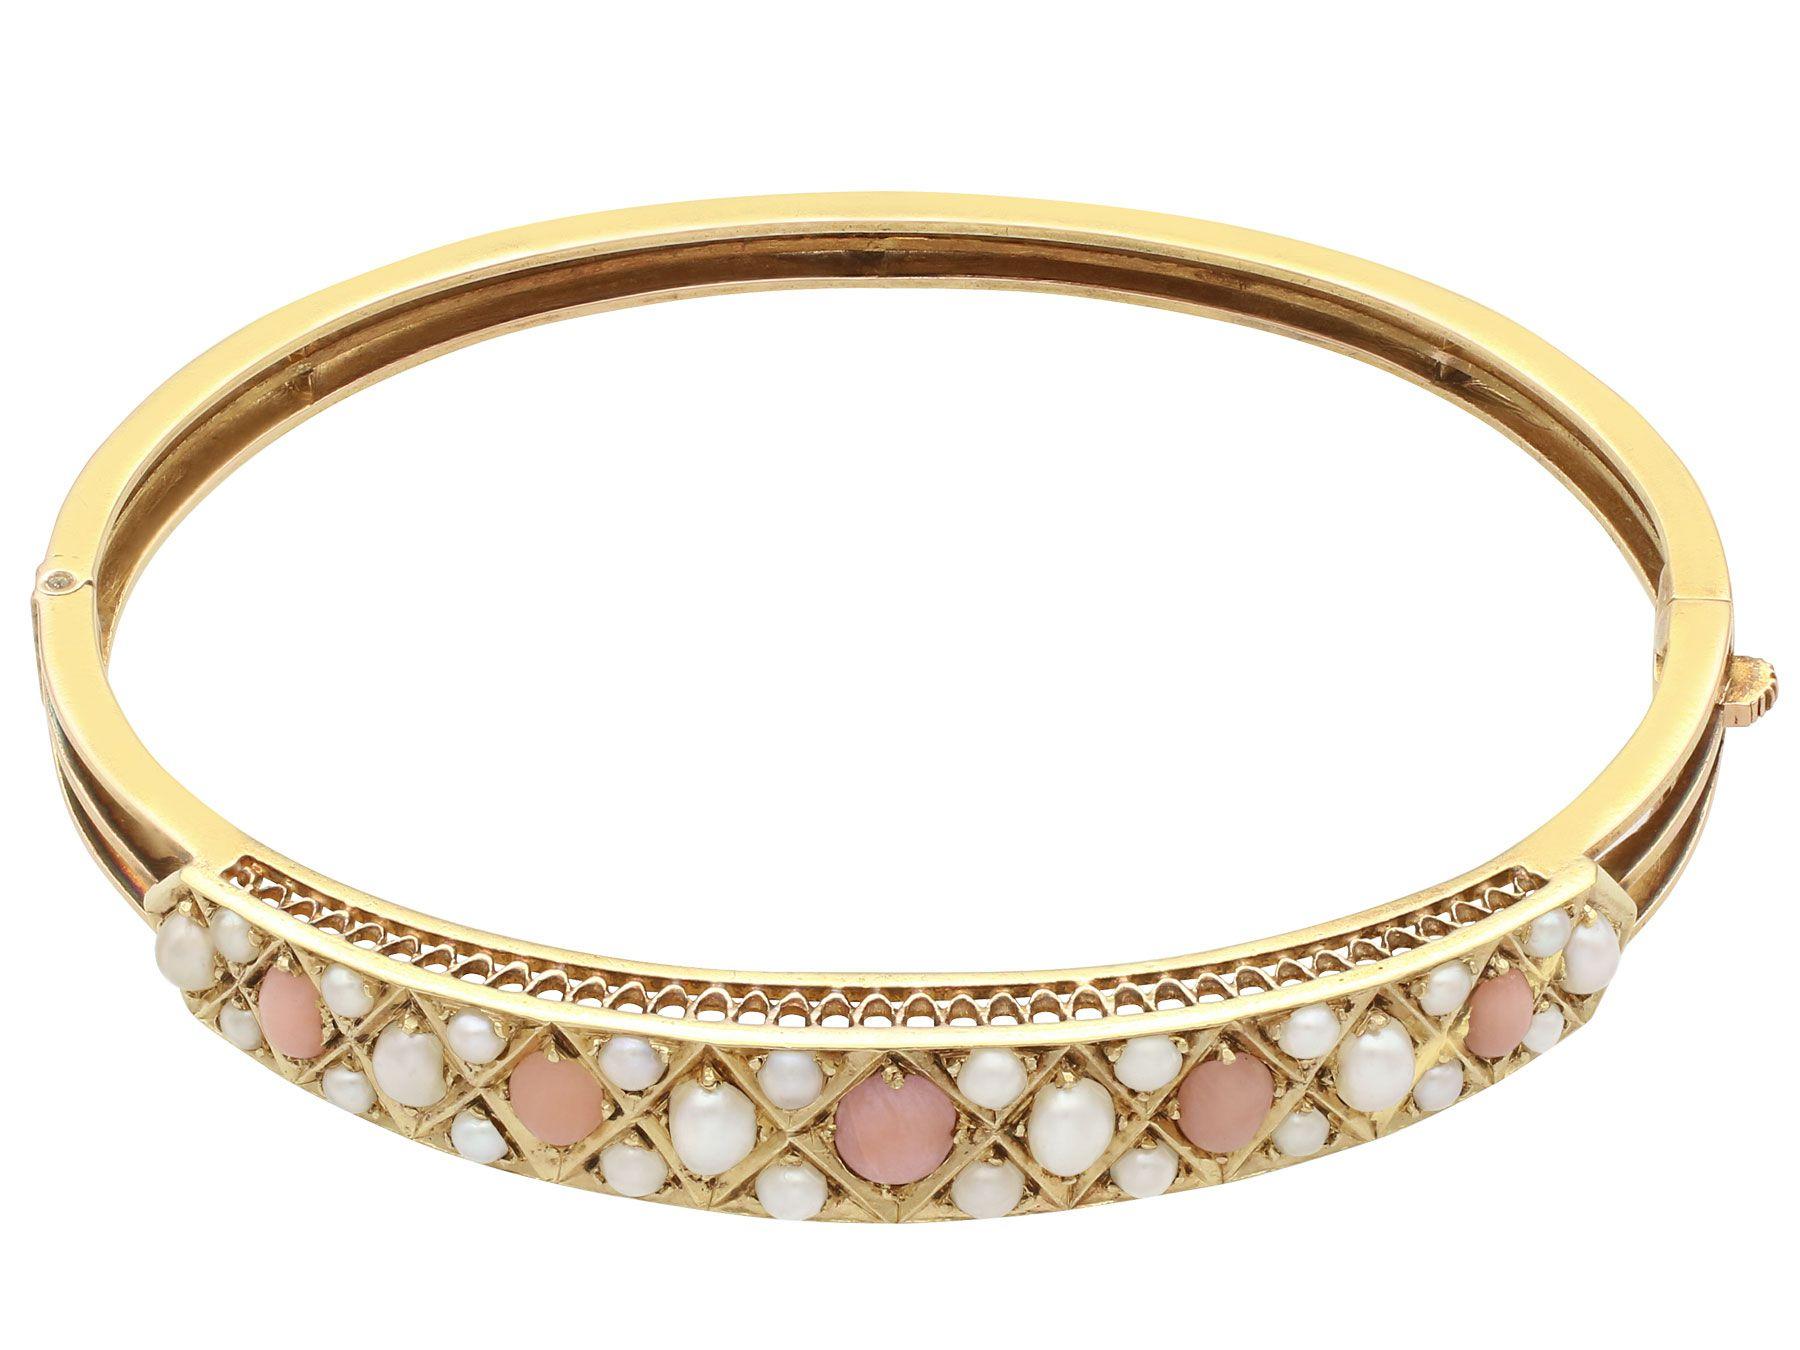 An impressive antique Victorian coral and seed pearl, 15 karat yellow gold bangle; part of our diverse antique jewelry and estate jewelry collections.

This fine and impressive coral and pearl bangle has been crafted in 15k yellow gold.

The